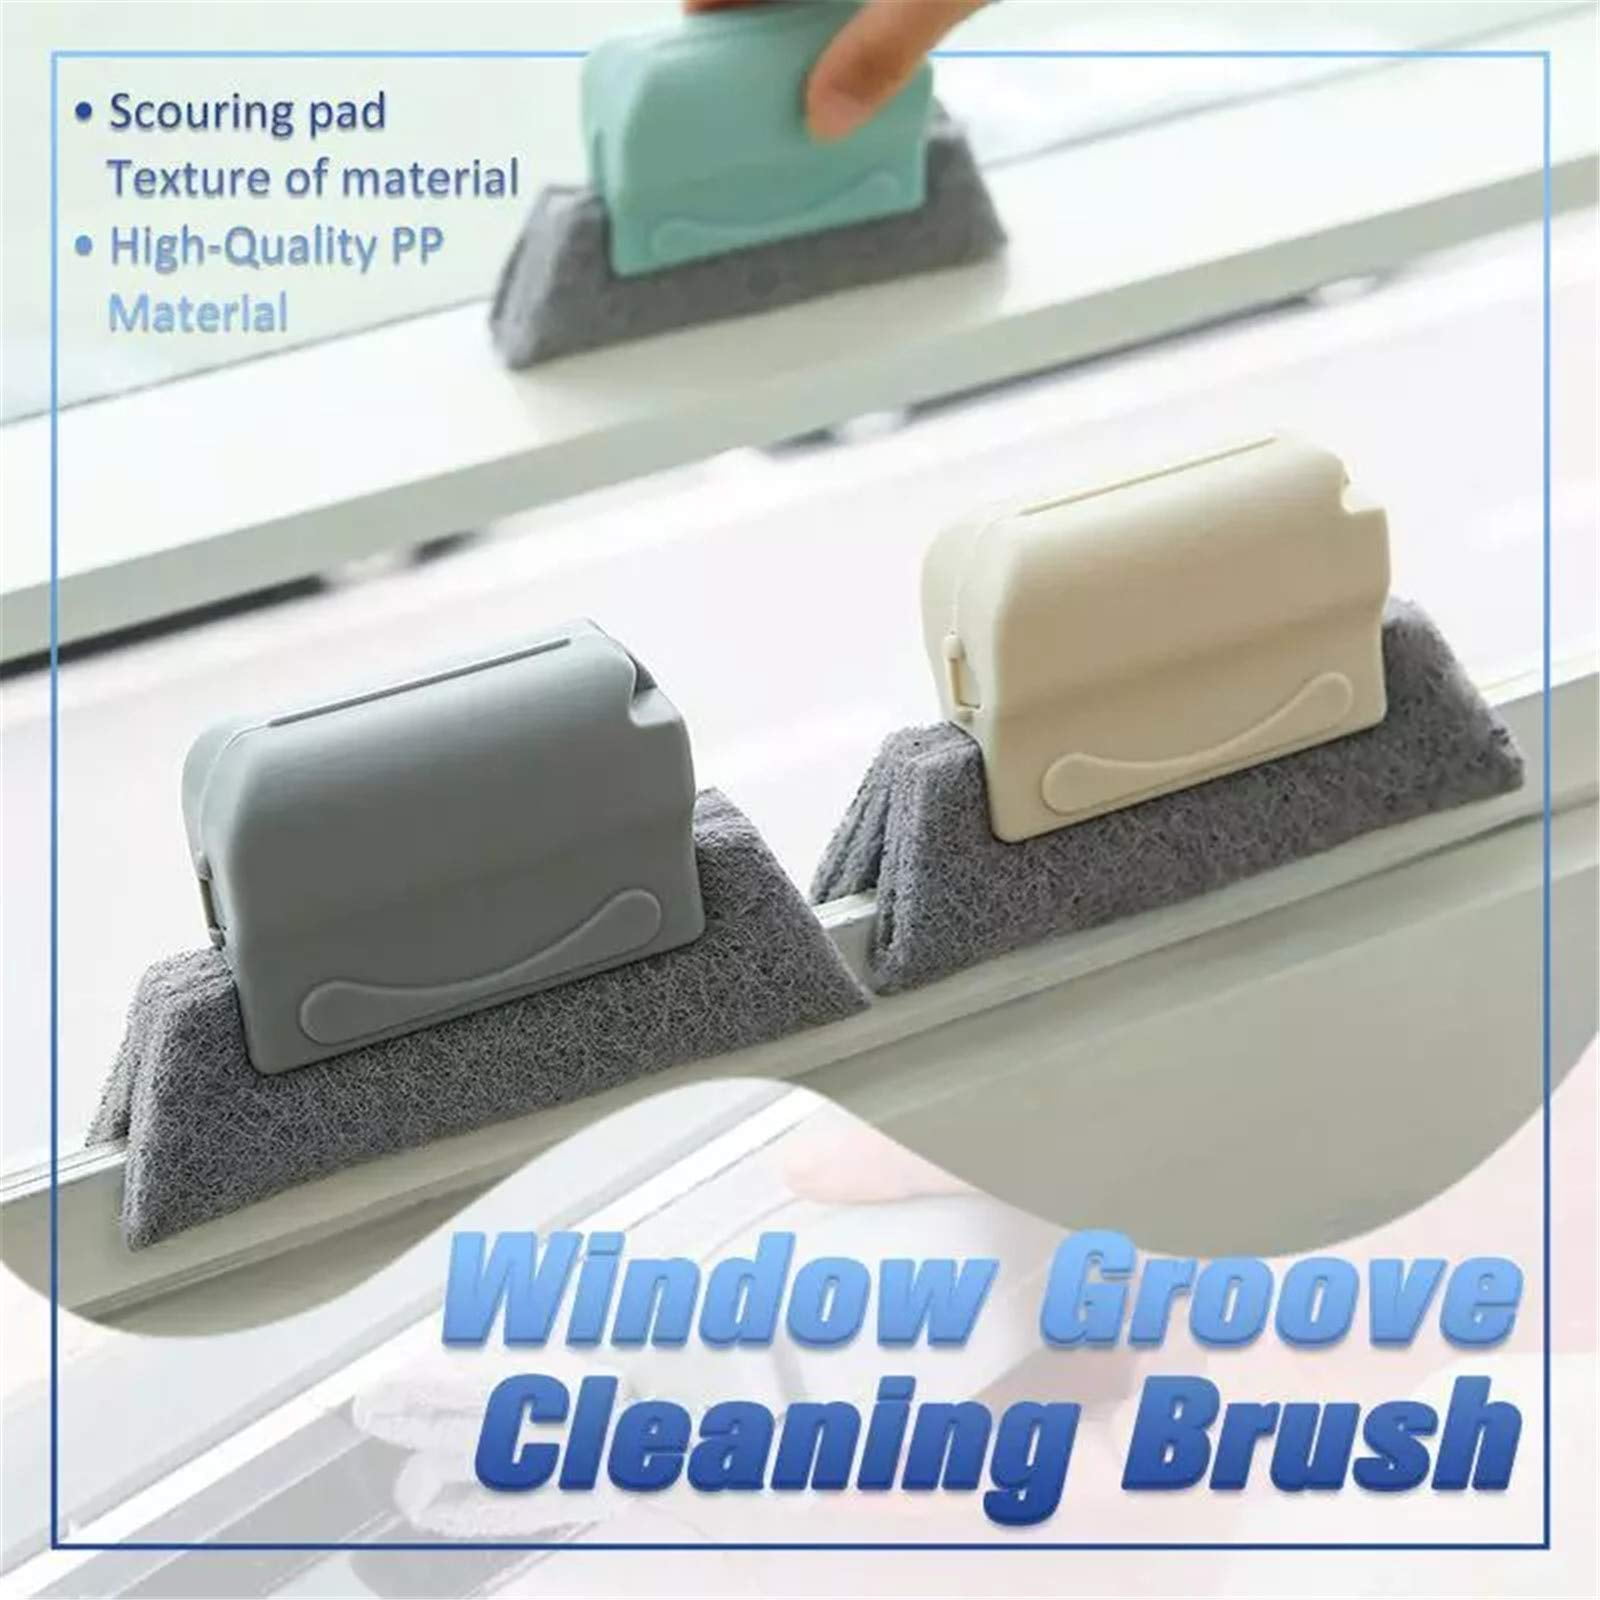 Creative Groove Cleaning Brush Magic window cleaning brush-Quickly clean corners 